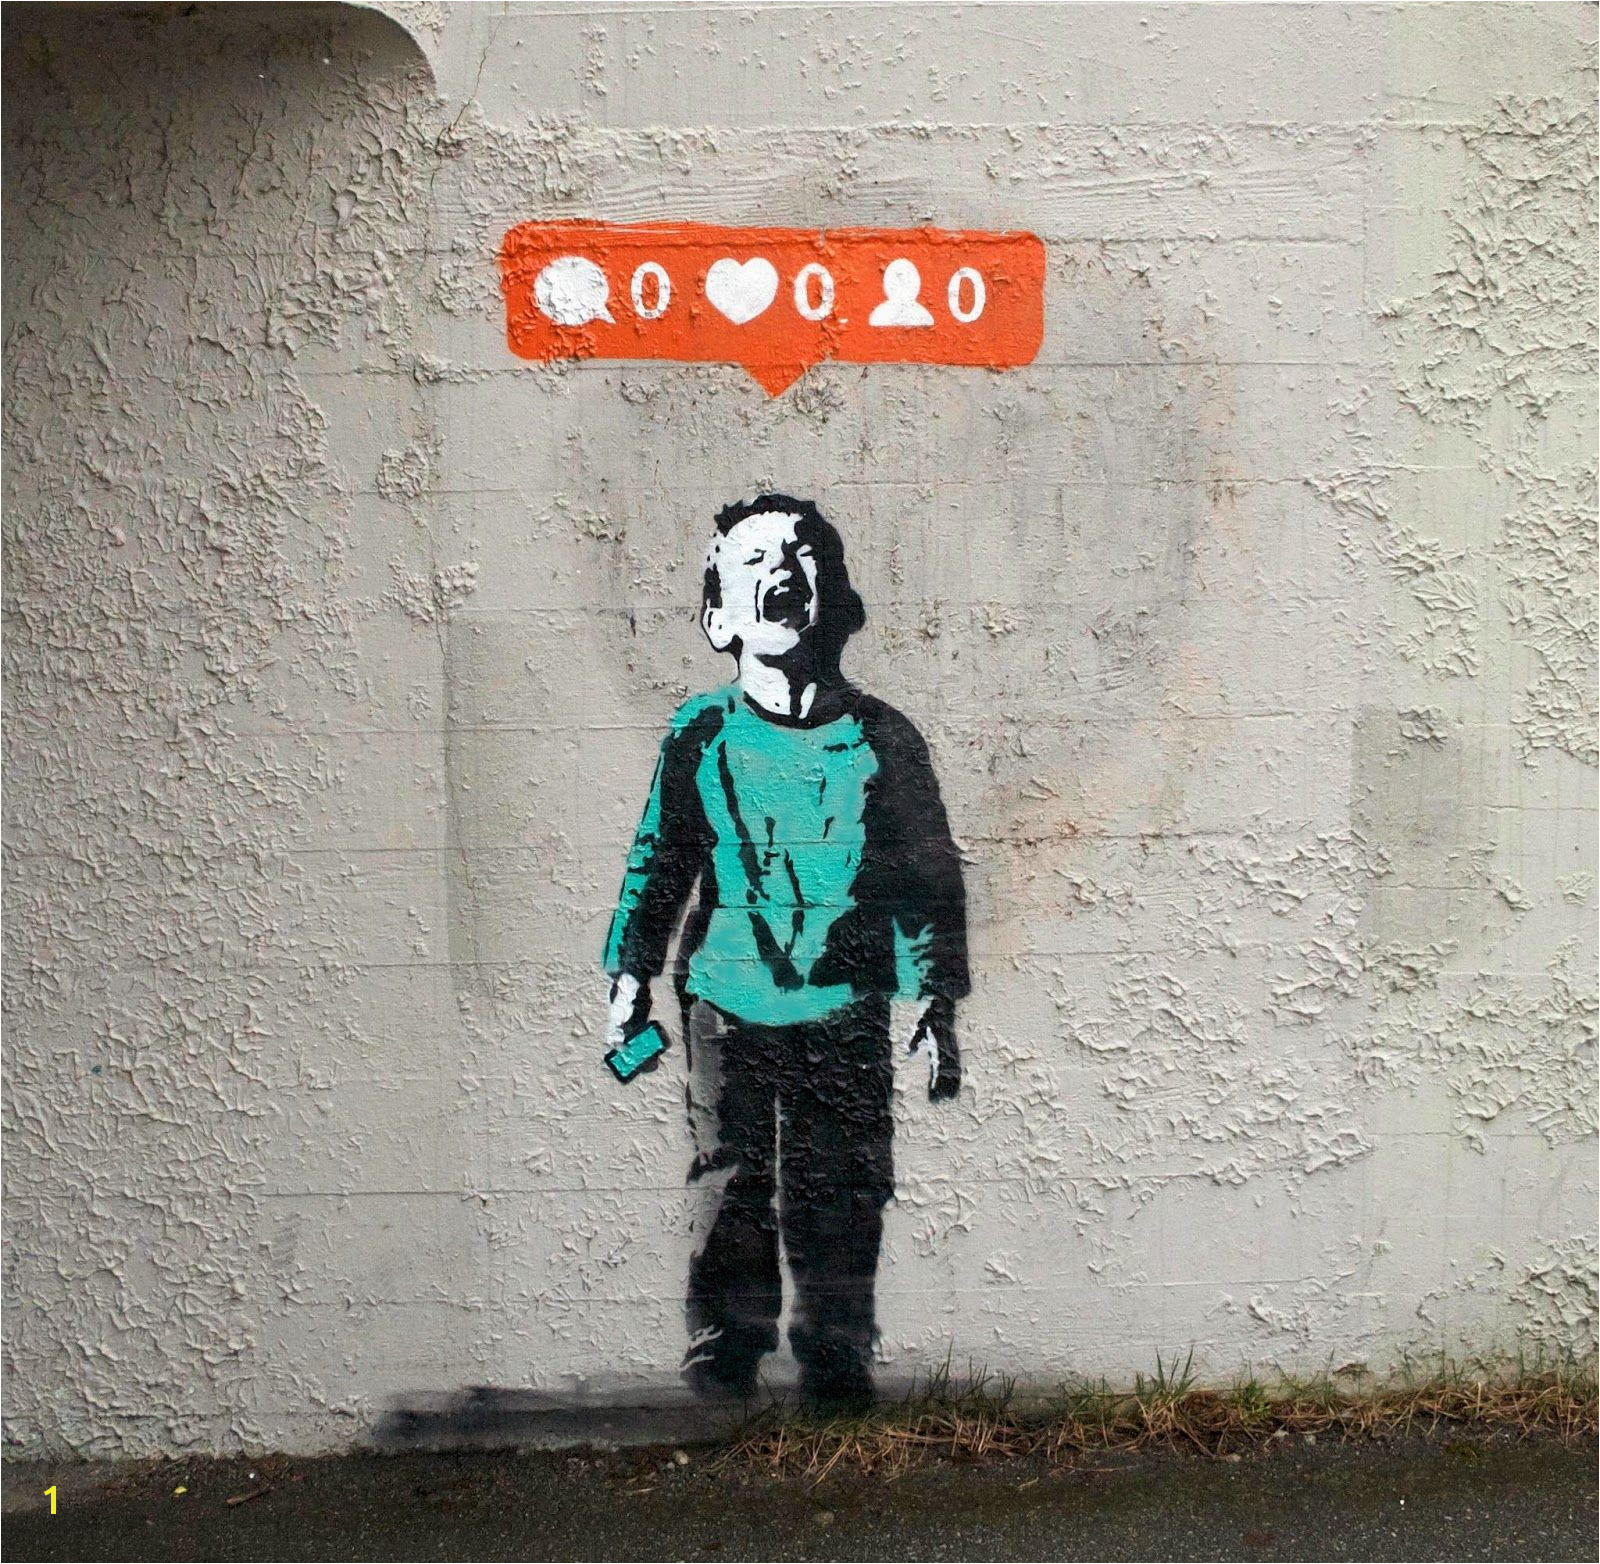 "Nobody Likes Me" is the newest offering by Canadian Street Artist Iâ¥ to